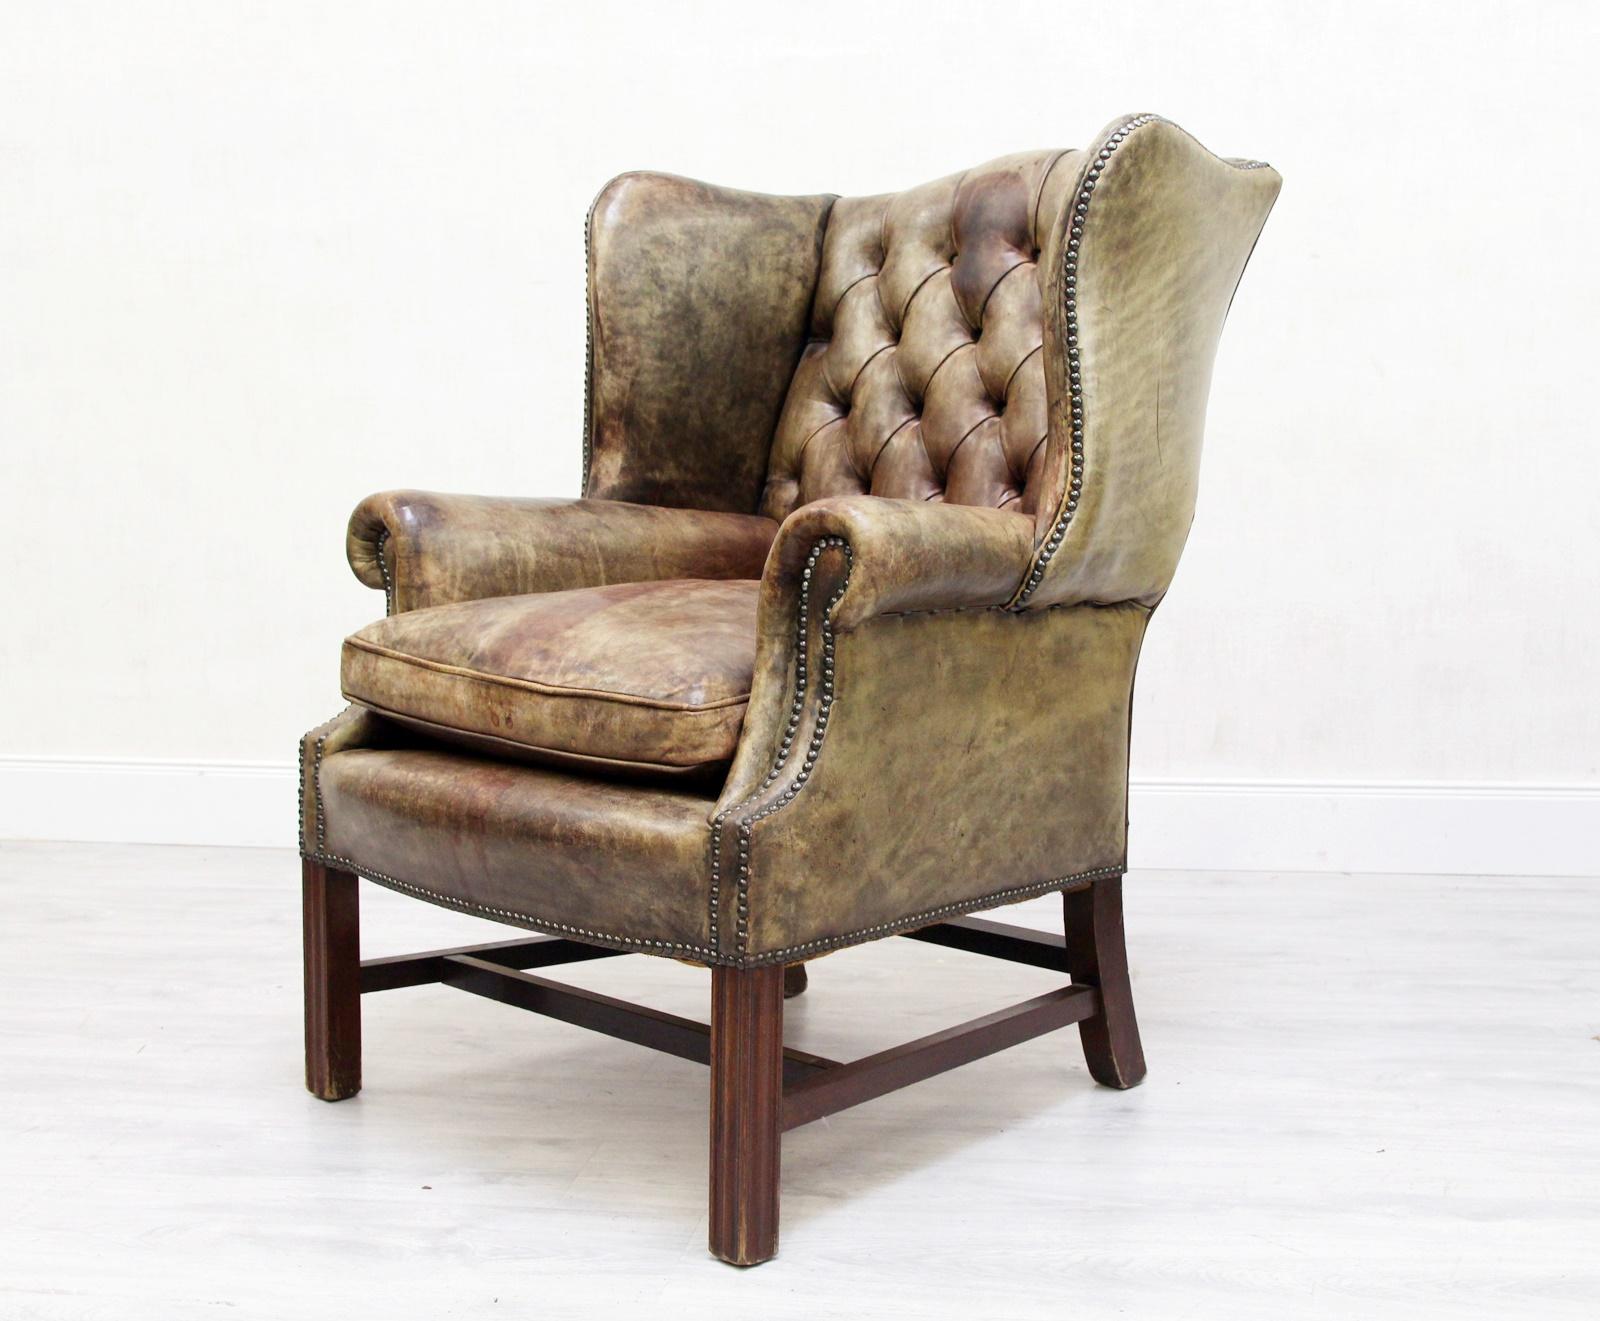 2-Chesterfield Armchair Armchair Wing Chair Antique Chair im Angebot 3